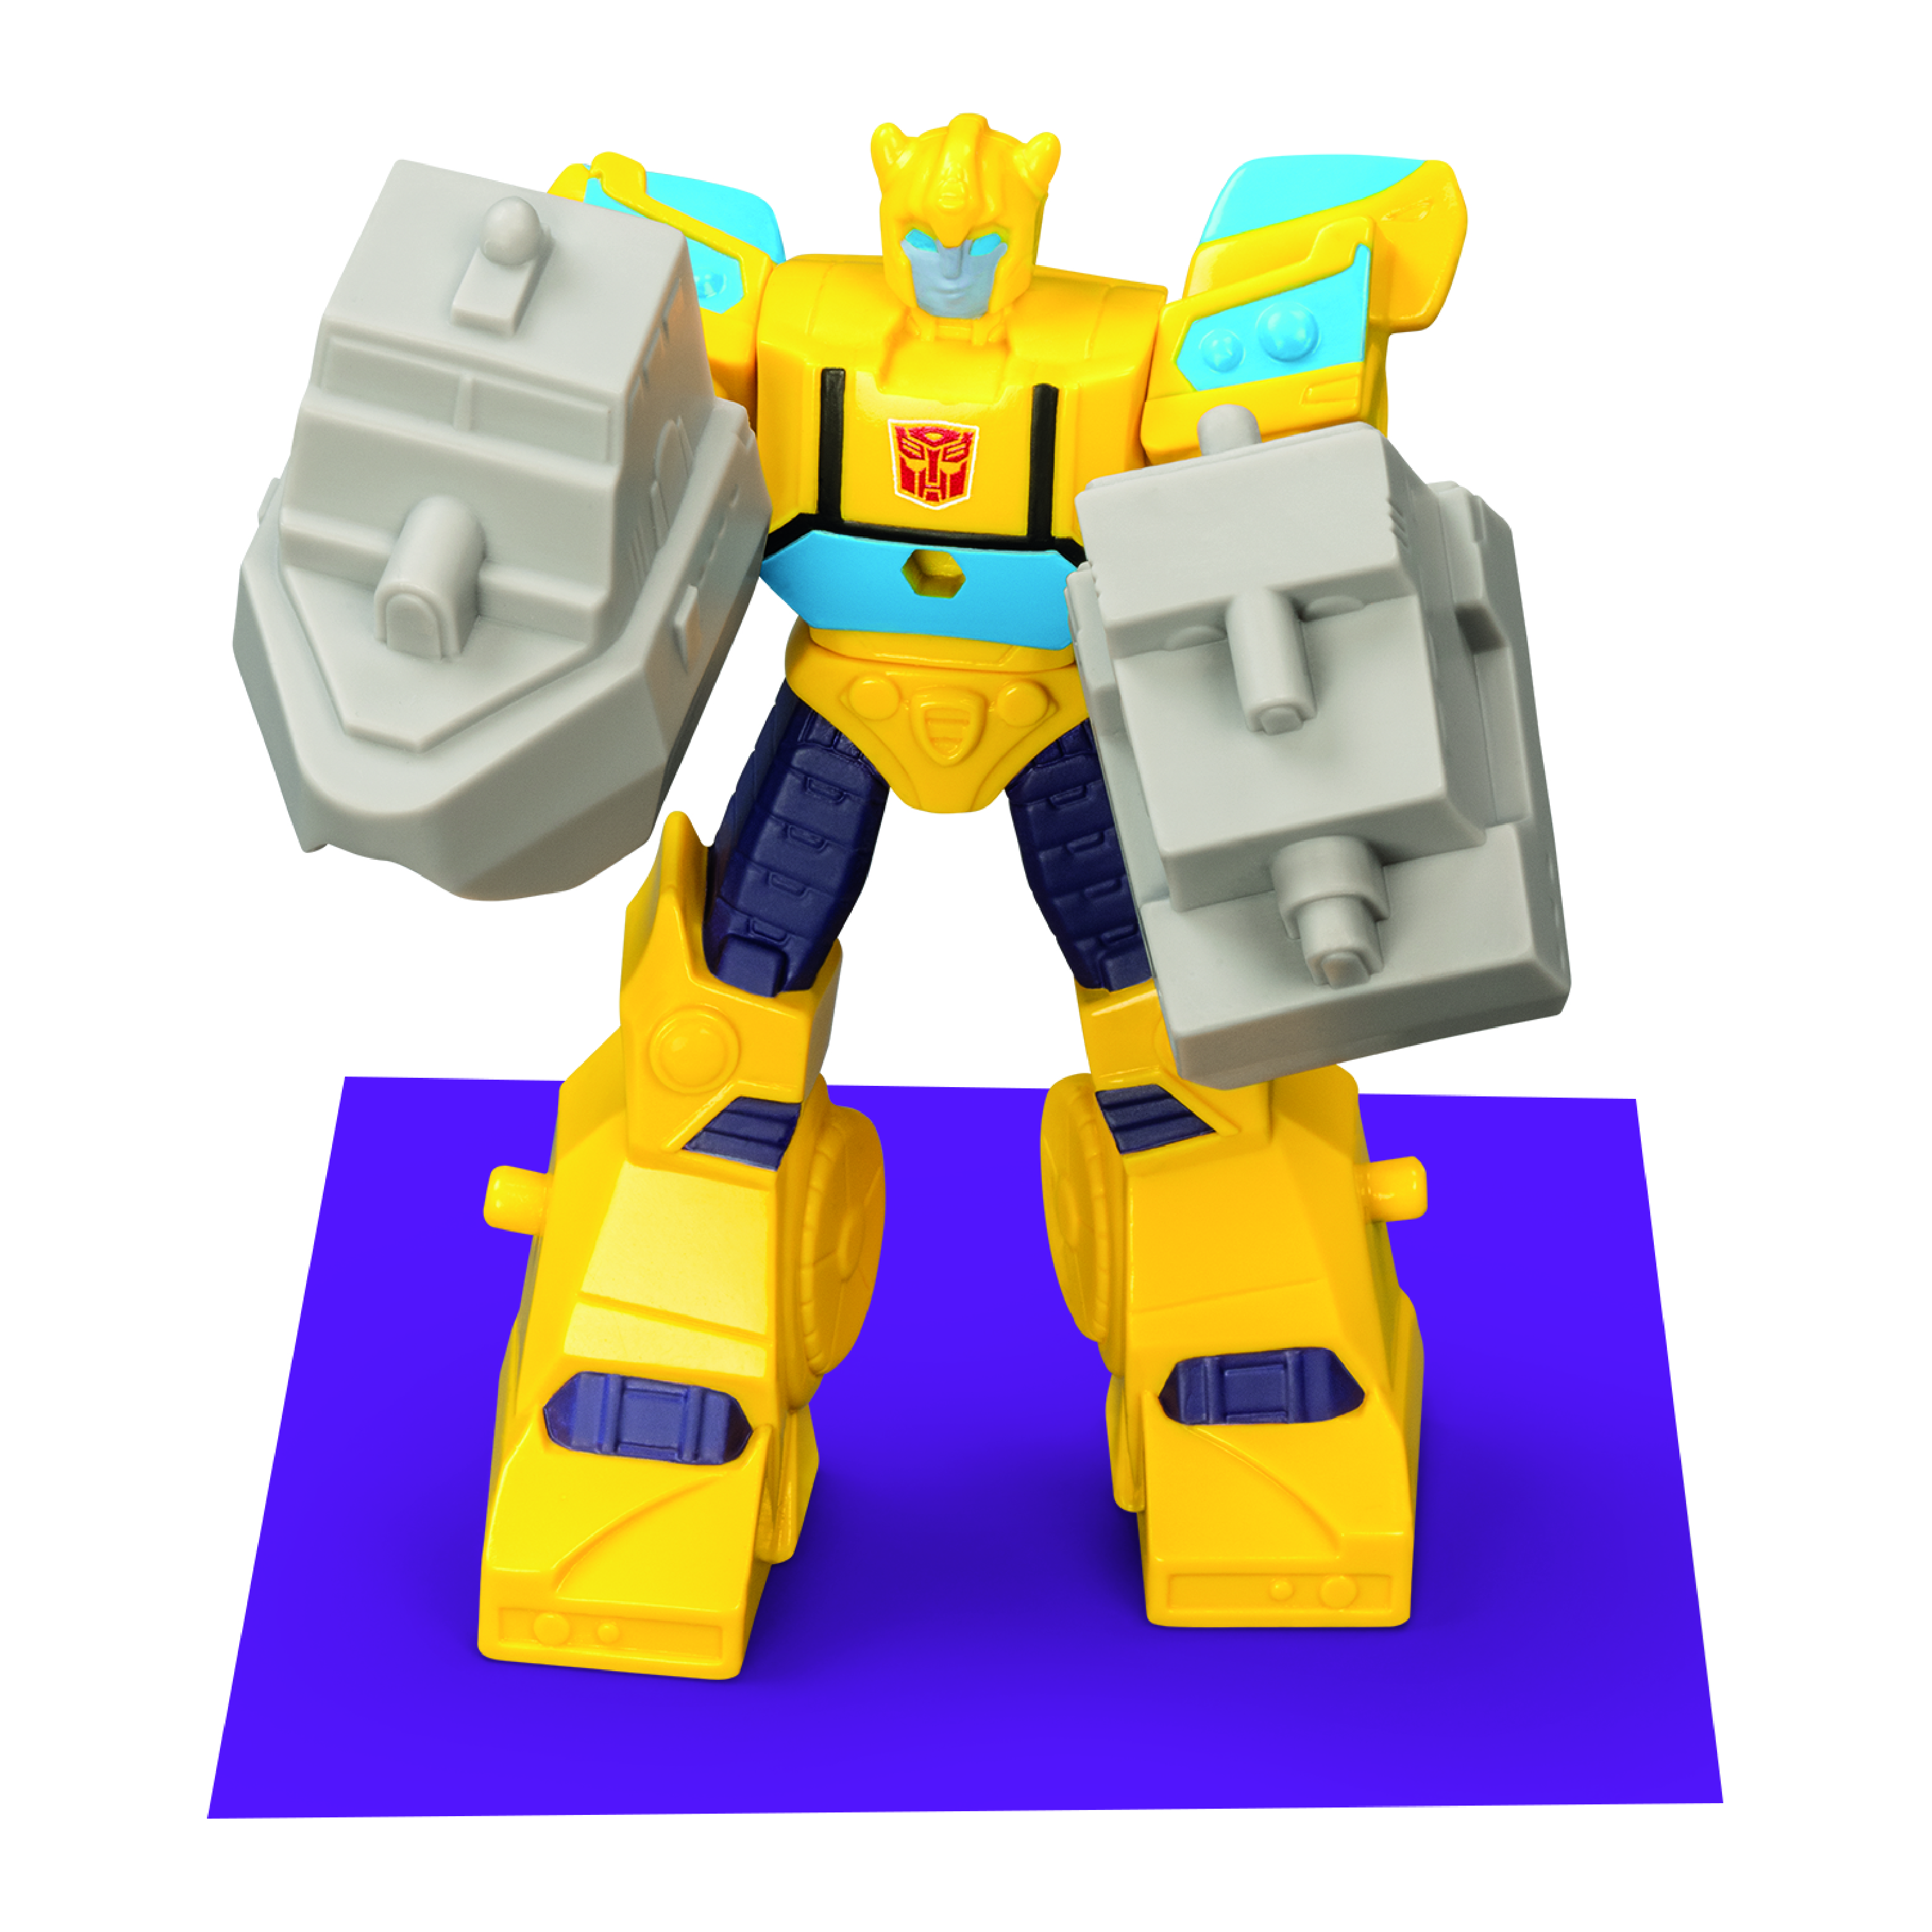 New McDonald’s Happy Meal Transformers and My Little Pony Toys to be launched from 12 Sep – 9 Oct 19 - 2